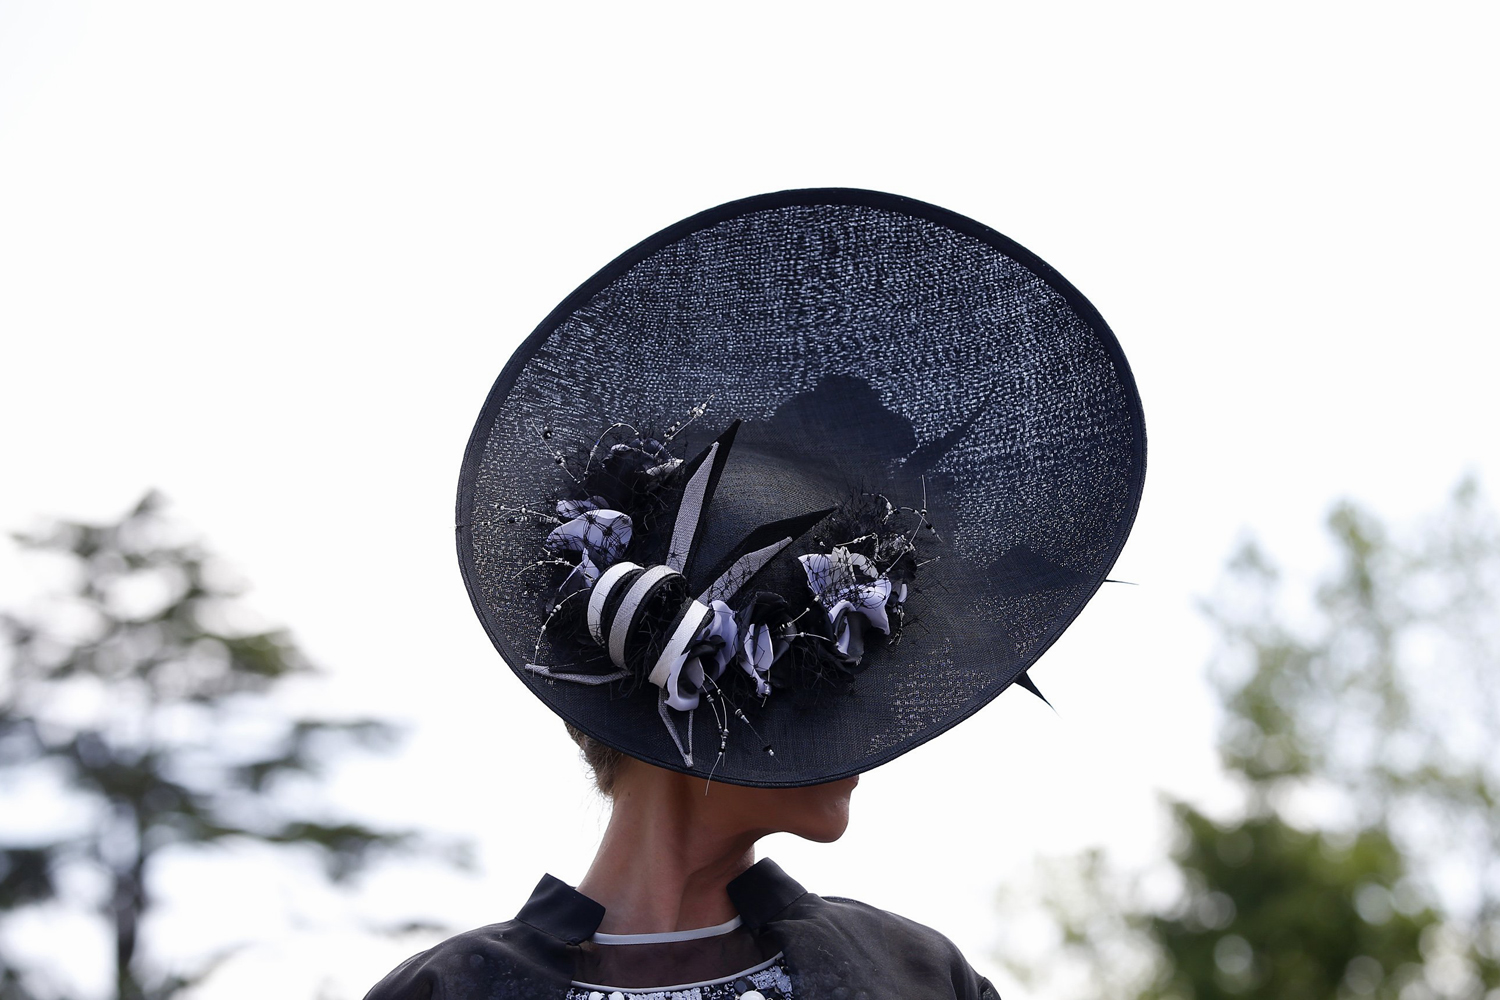 Milnda Strudwick wears an ornate hat on the first day of the Royal Ascot horse racing meeting at Ascot, June, 17, 2014.